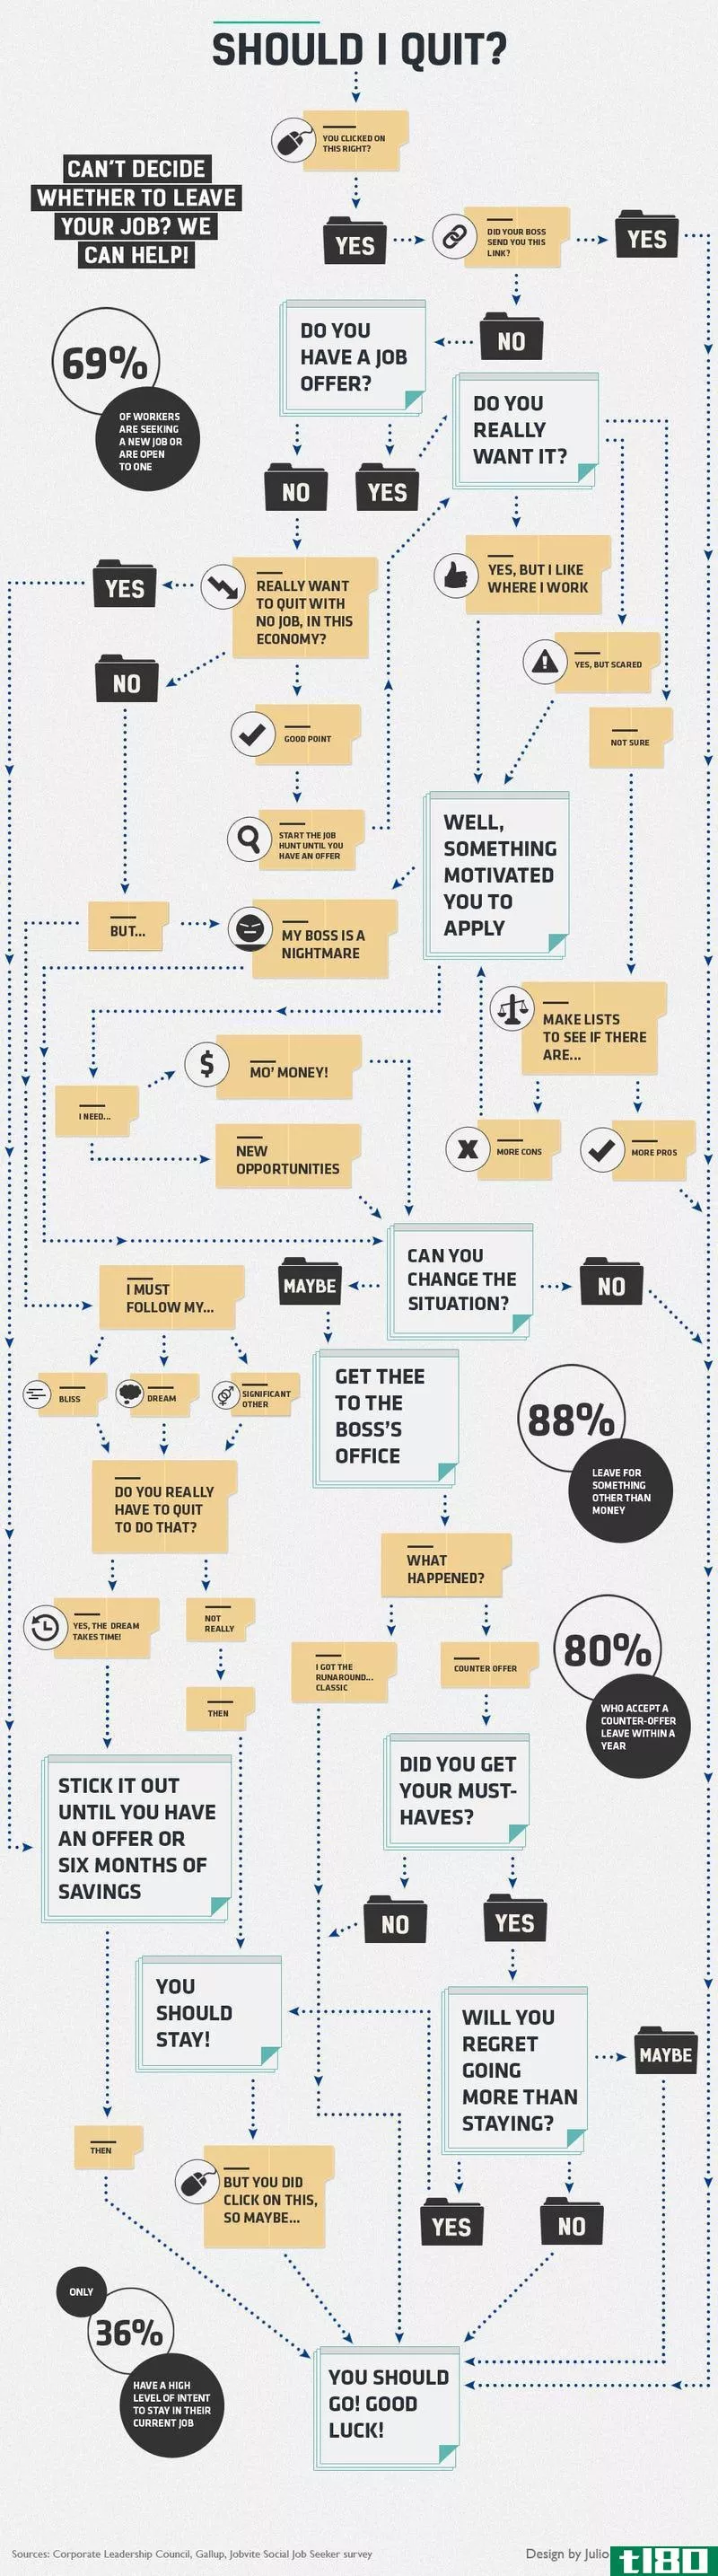 Illustration for article titled This Flowchart Can Help You Figure Out If You Should Quit Your Job